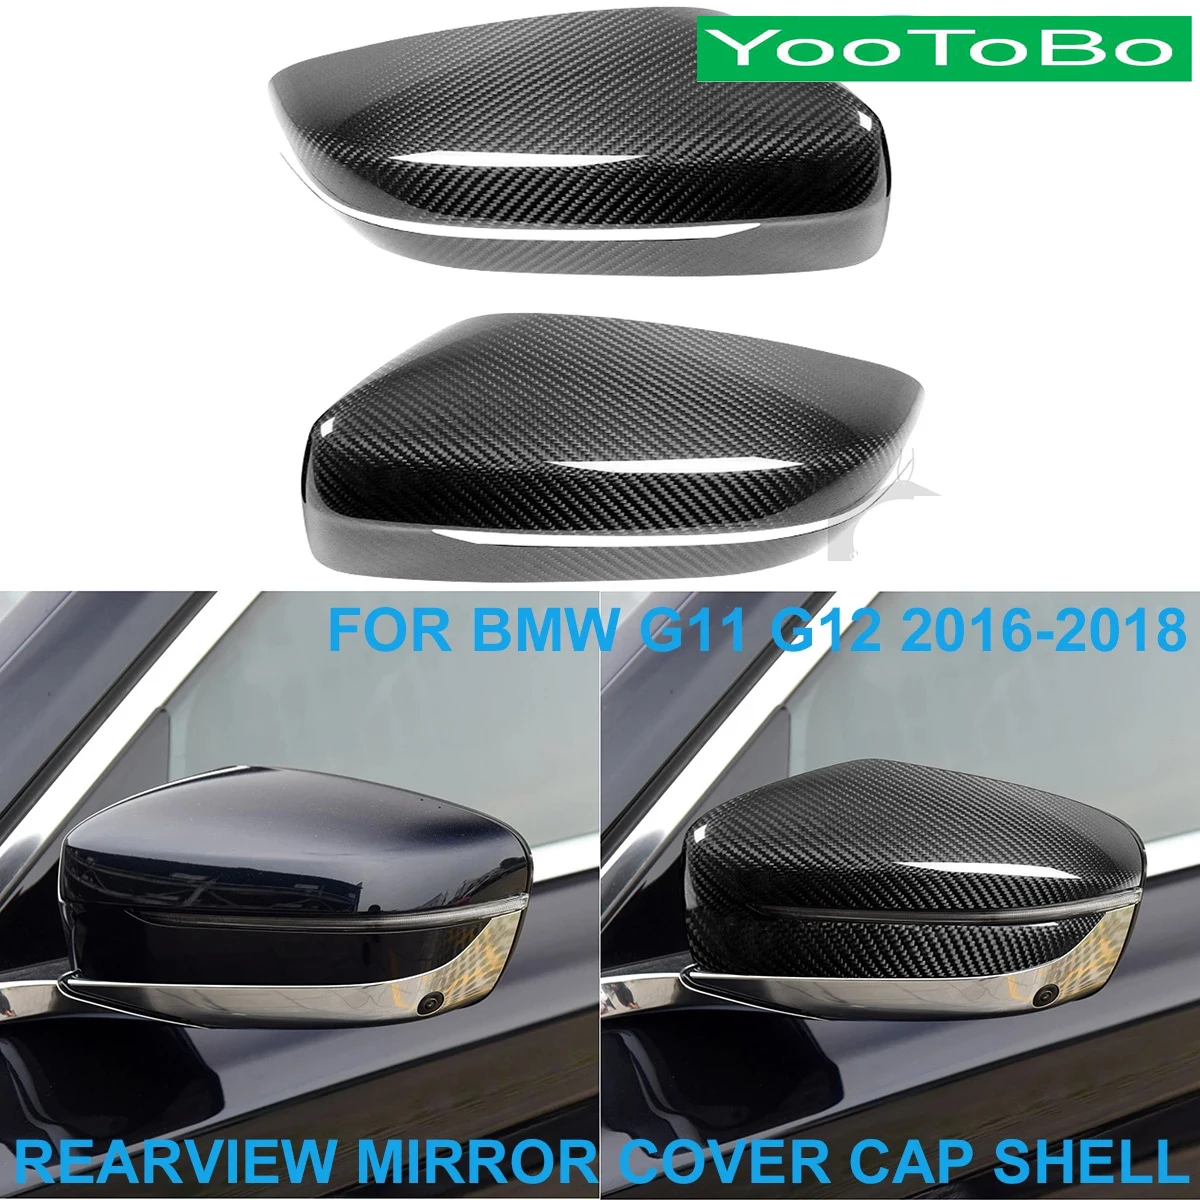 LHD RHD Car Styling Real Dry Carbon Fiber Rearview Rear Side Mirror Cover Cap Shell Trim Sticker For BMW G11 G12 740i 750i 16-18